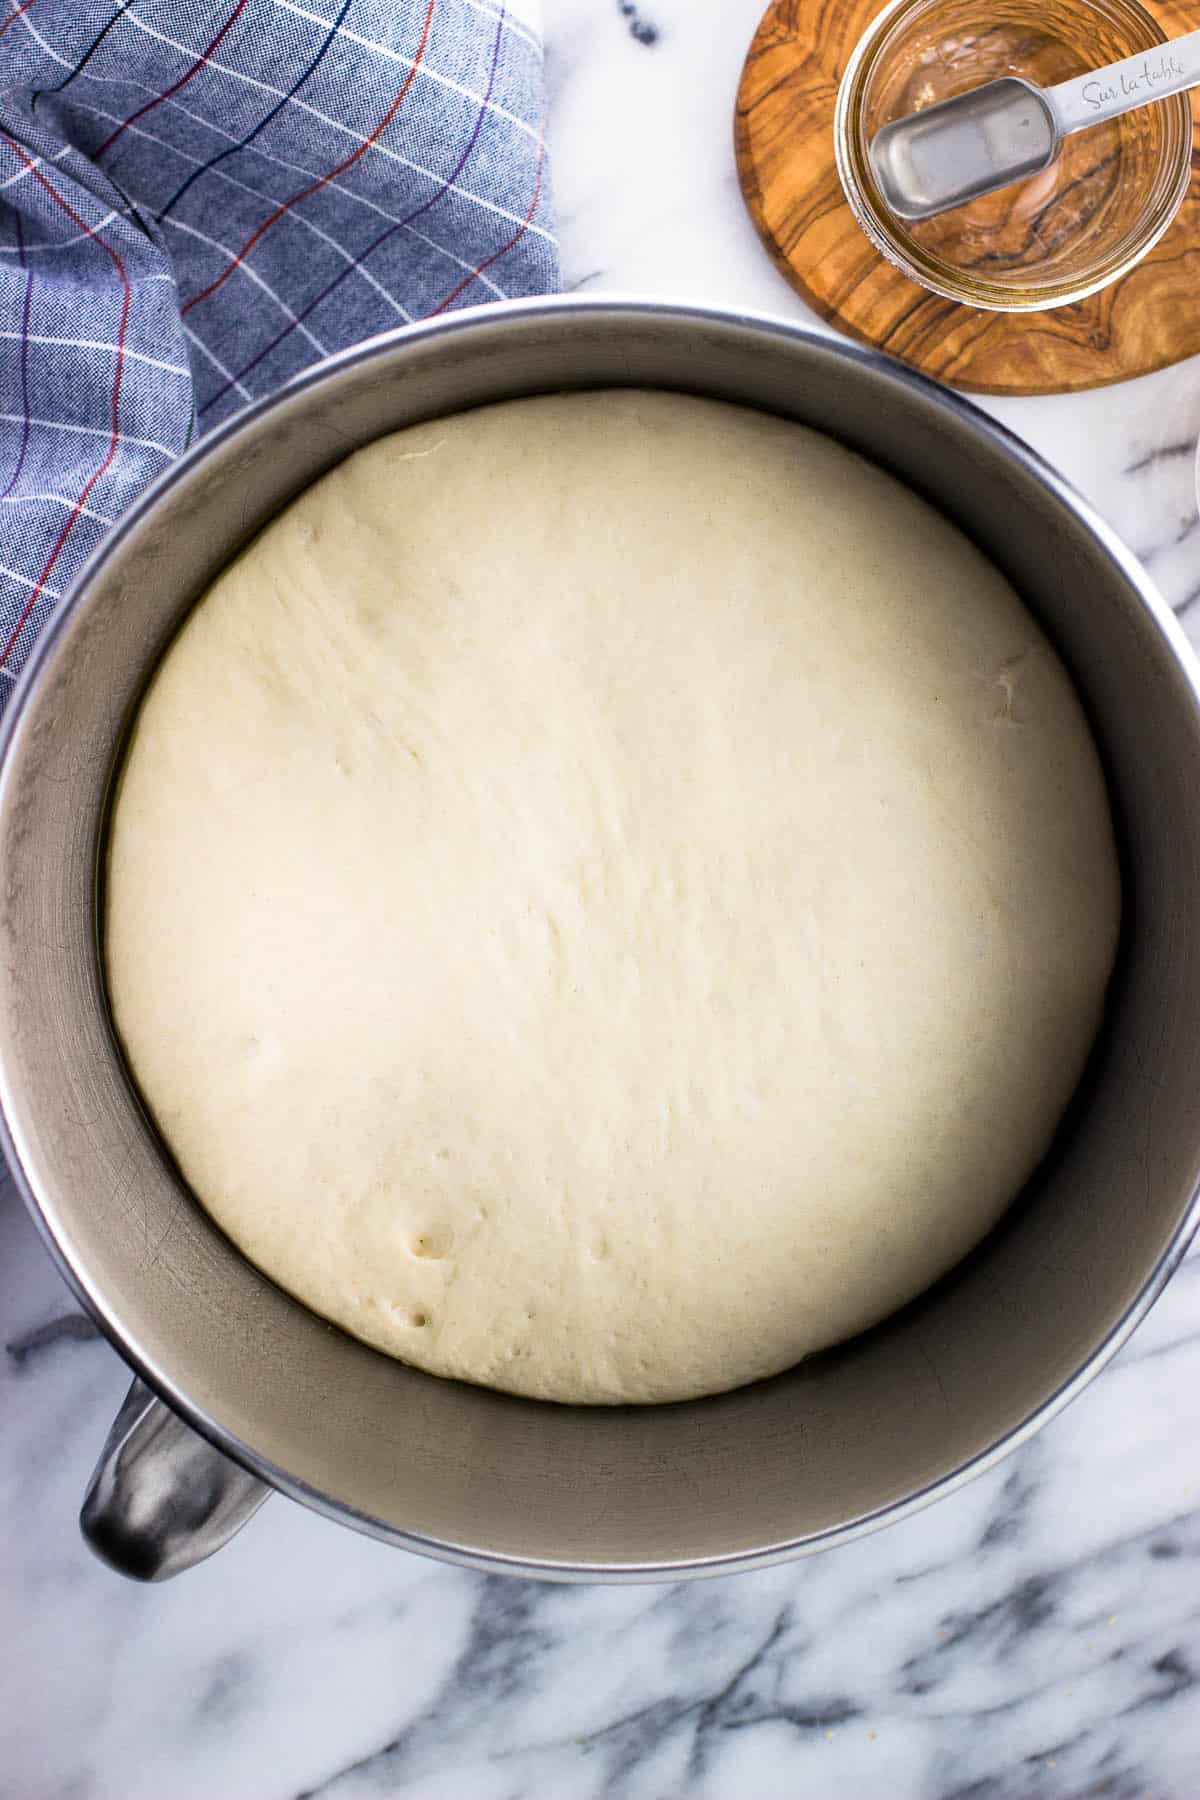 A large ball of dough in a bowl after rising.